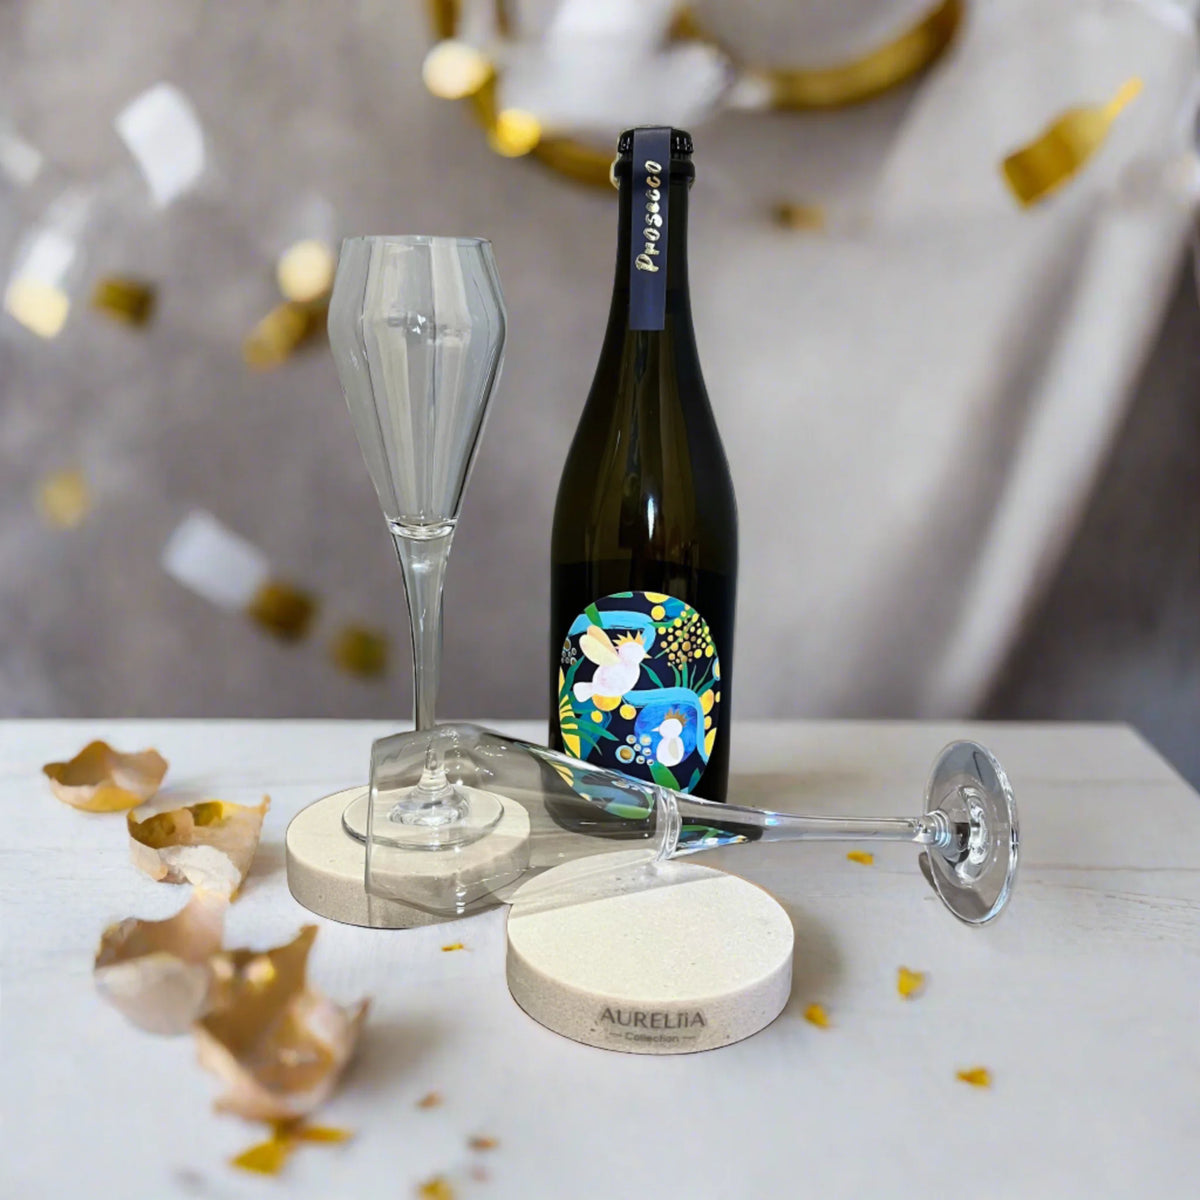 Just a Glass - King Valley Prosecco Just a Bottle, with DStill Unbreakable Prosecco Glasses, Aureliia Collection Coasters and confetti.